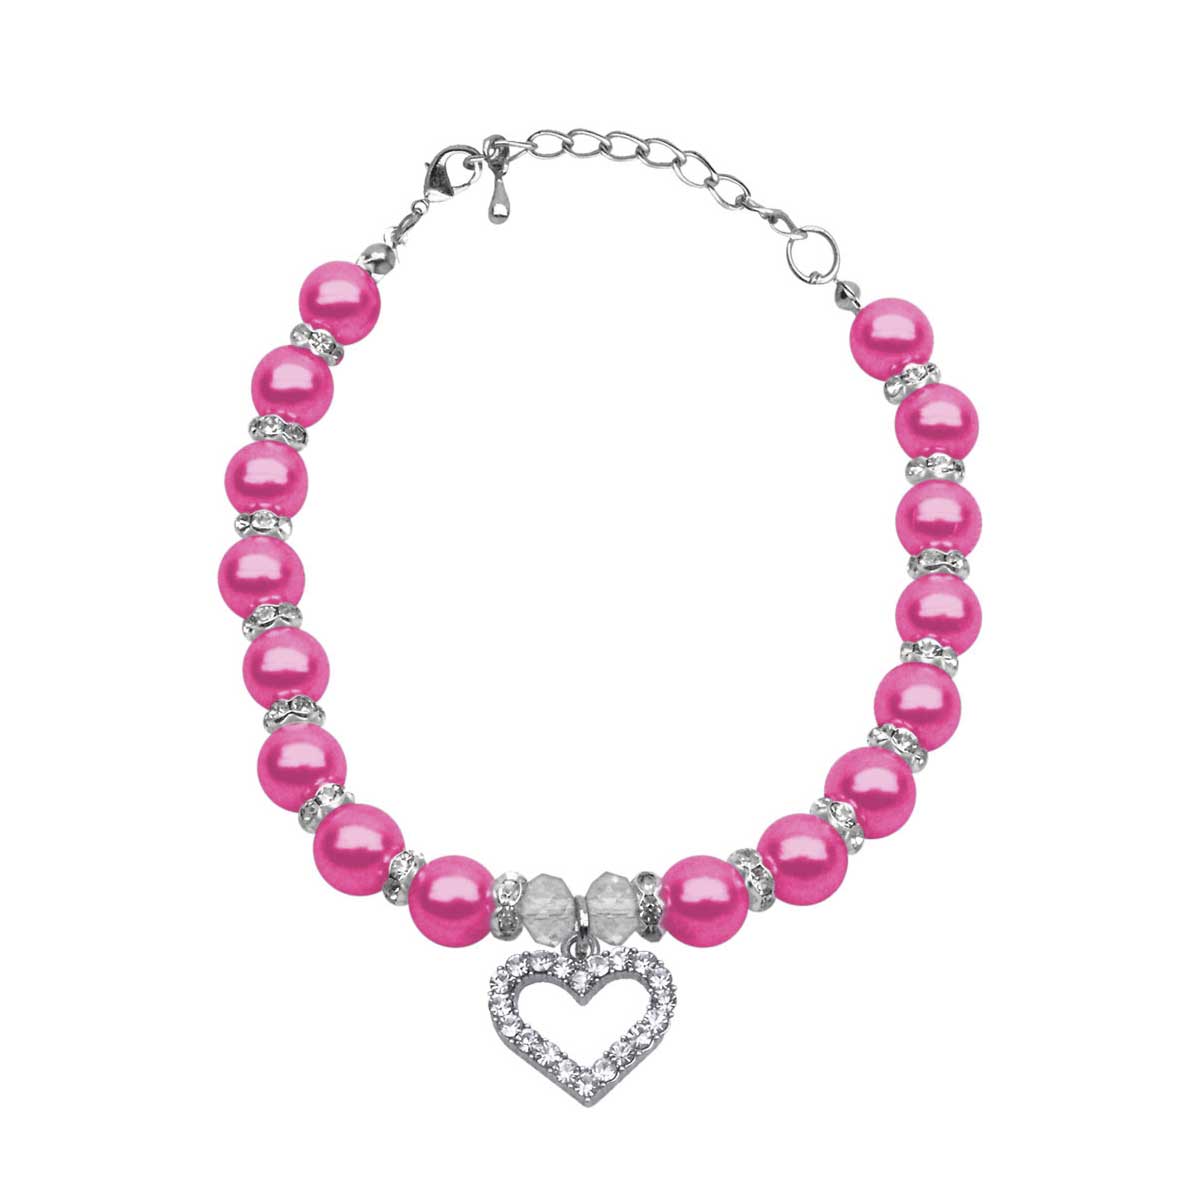 Crystal Heart Necklace with Bright Pink Pearls | Pawlicious & Company